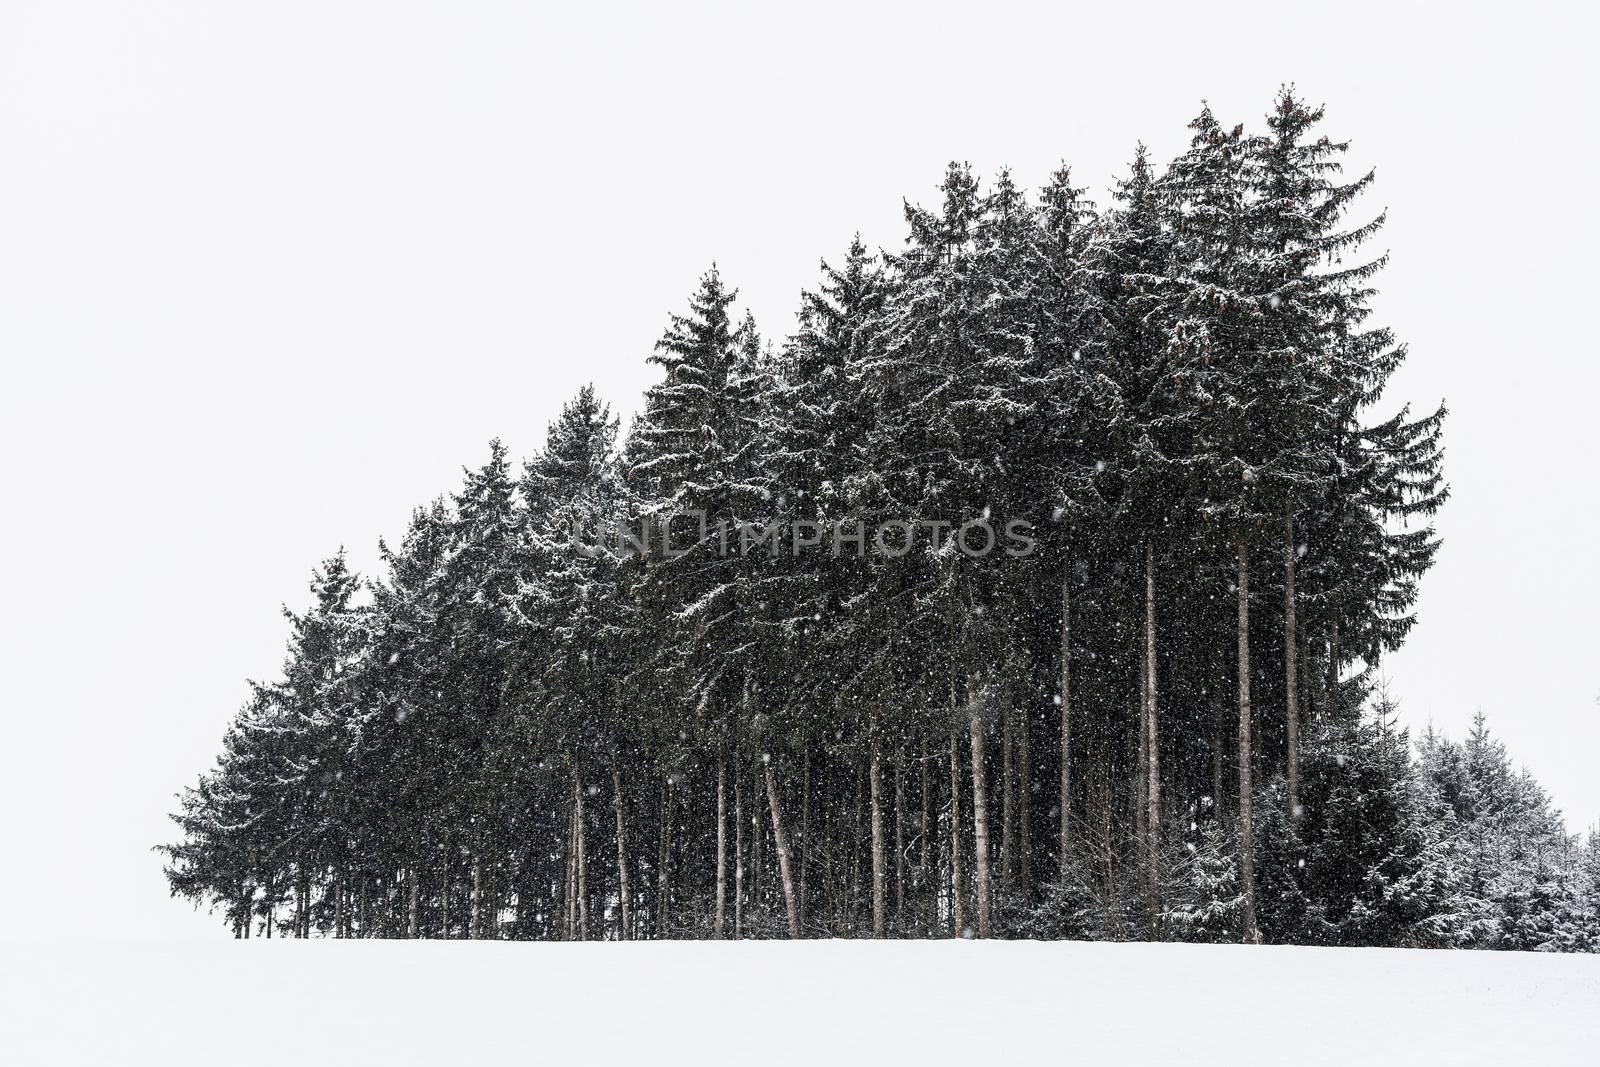 Forest and trees with snow in winter and blanket of clouds in Bavaria, Germany